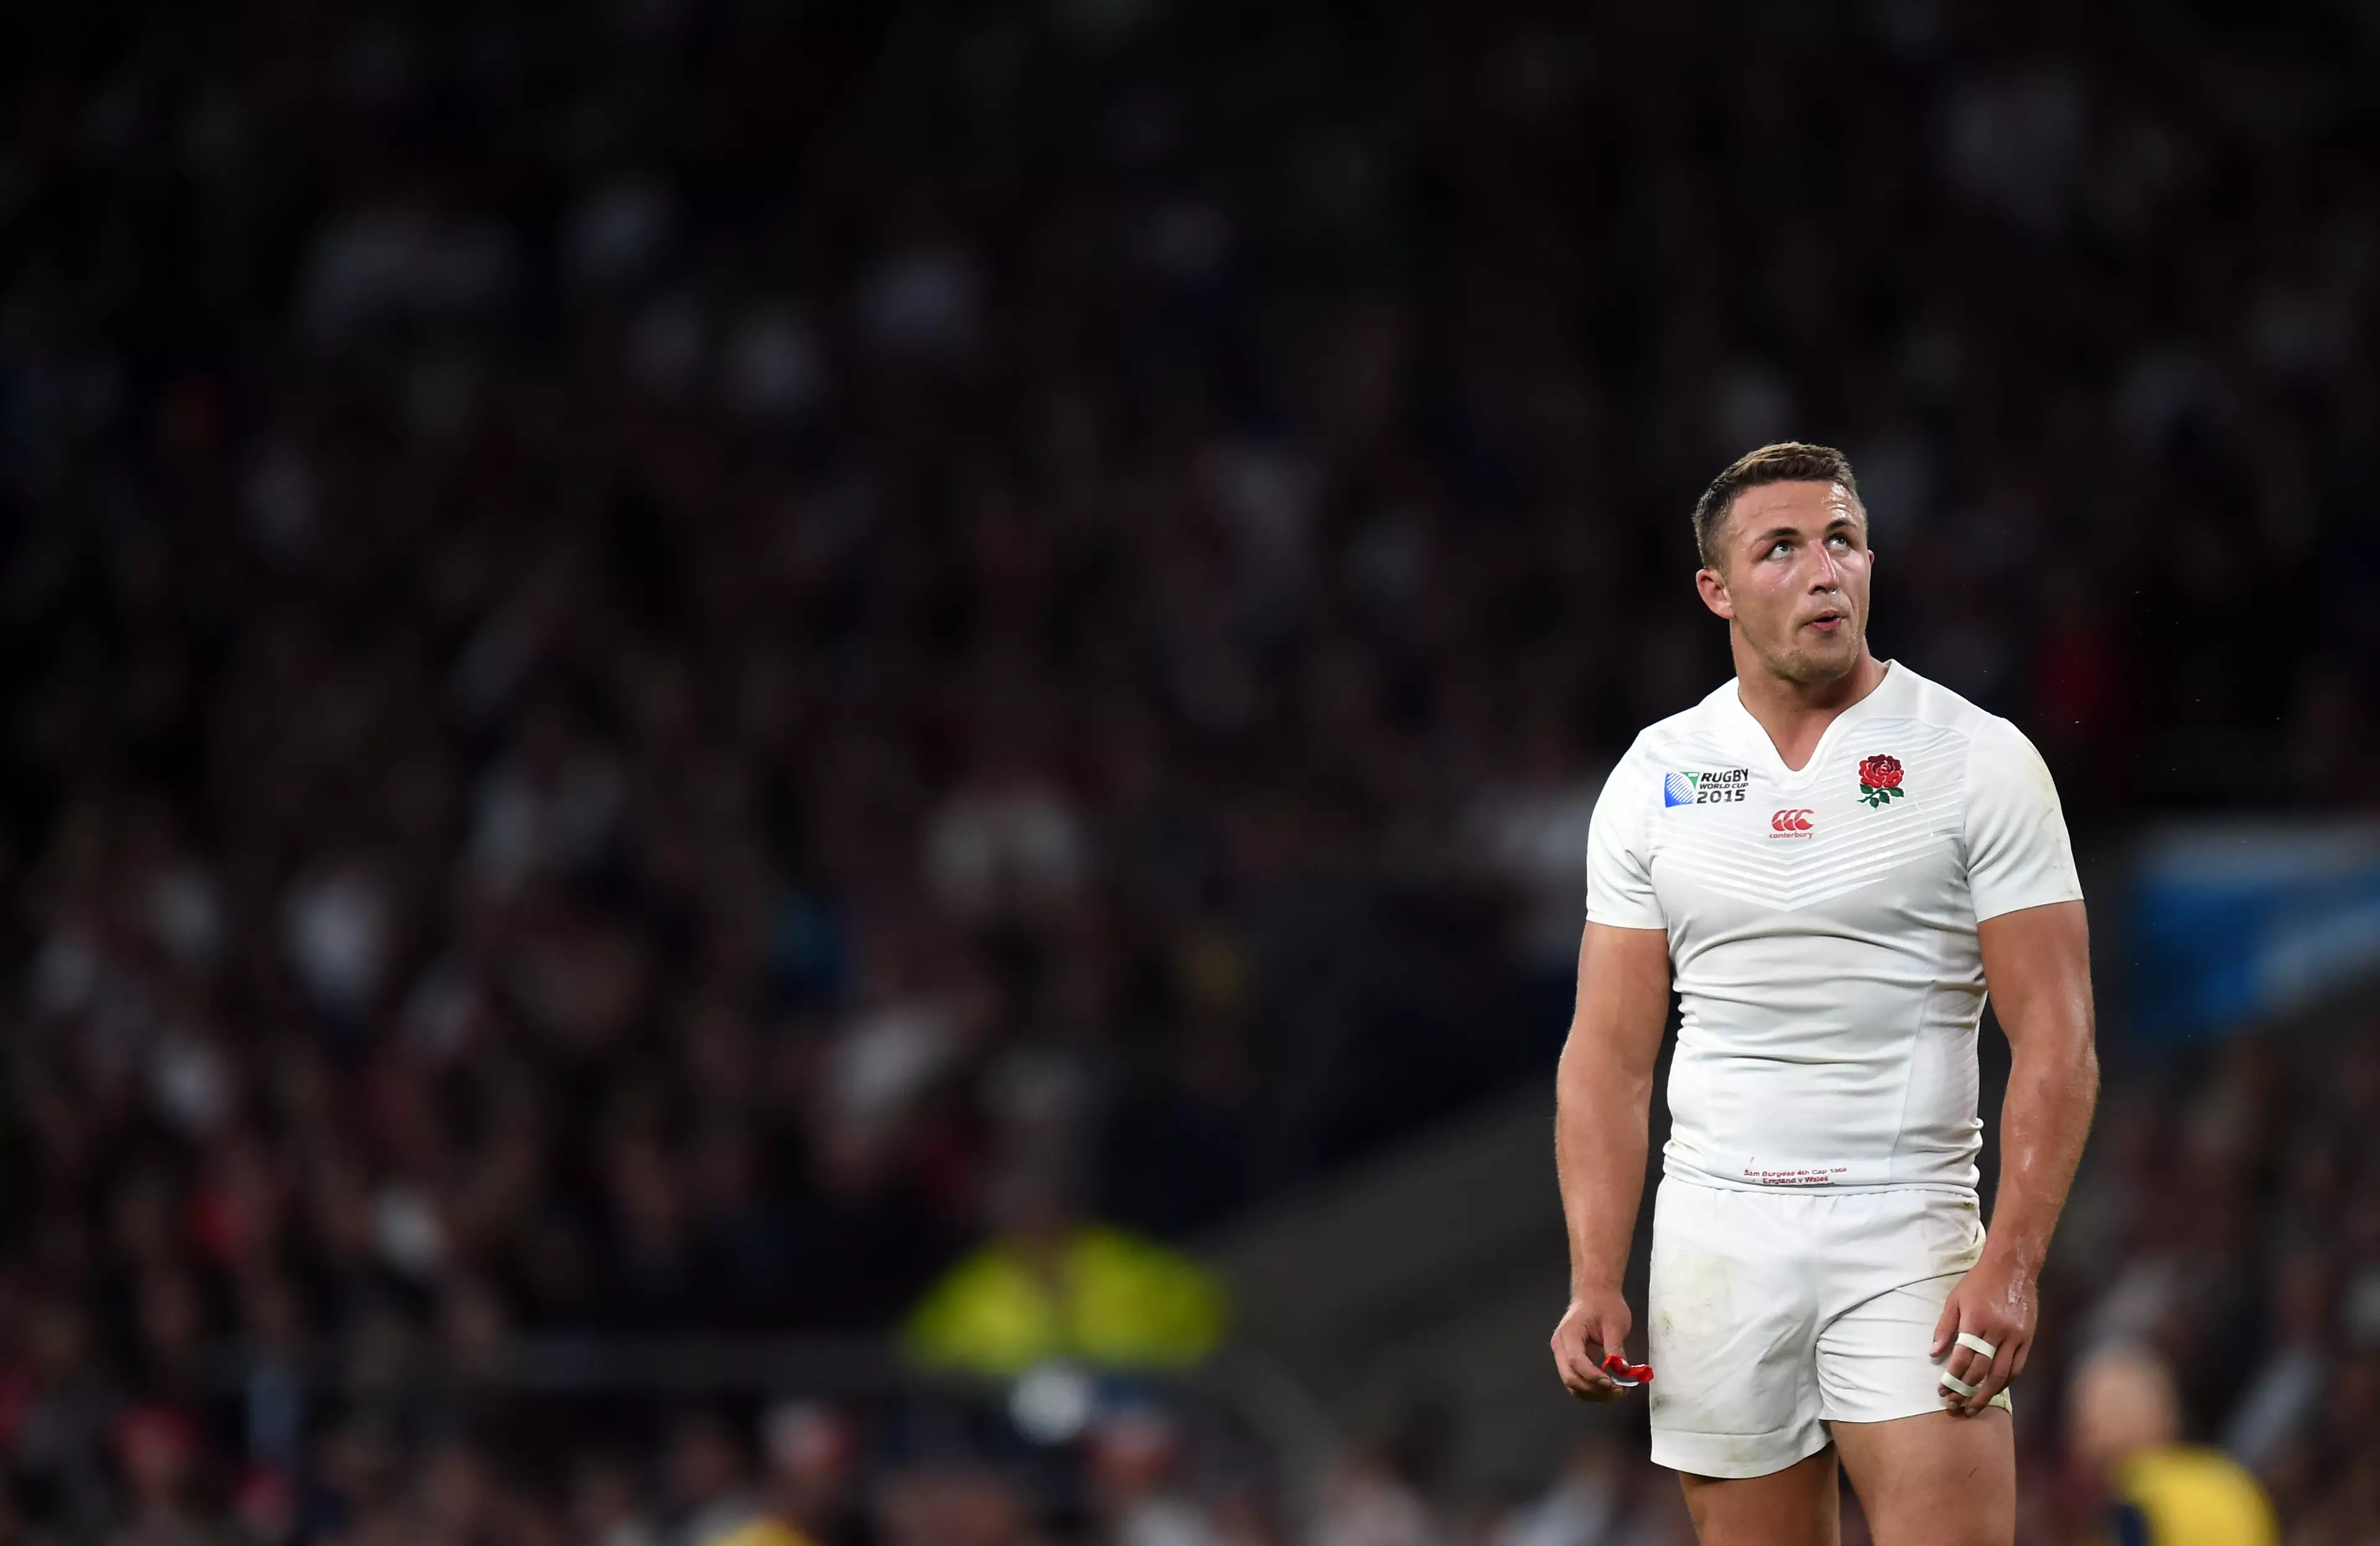 Sam Burgess representing England at the 2015 rugby union World Cup.